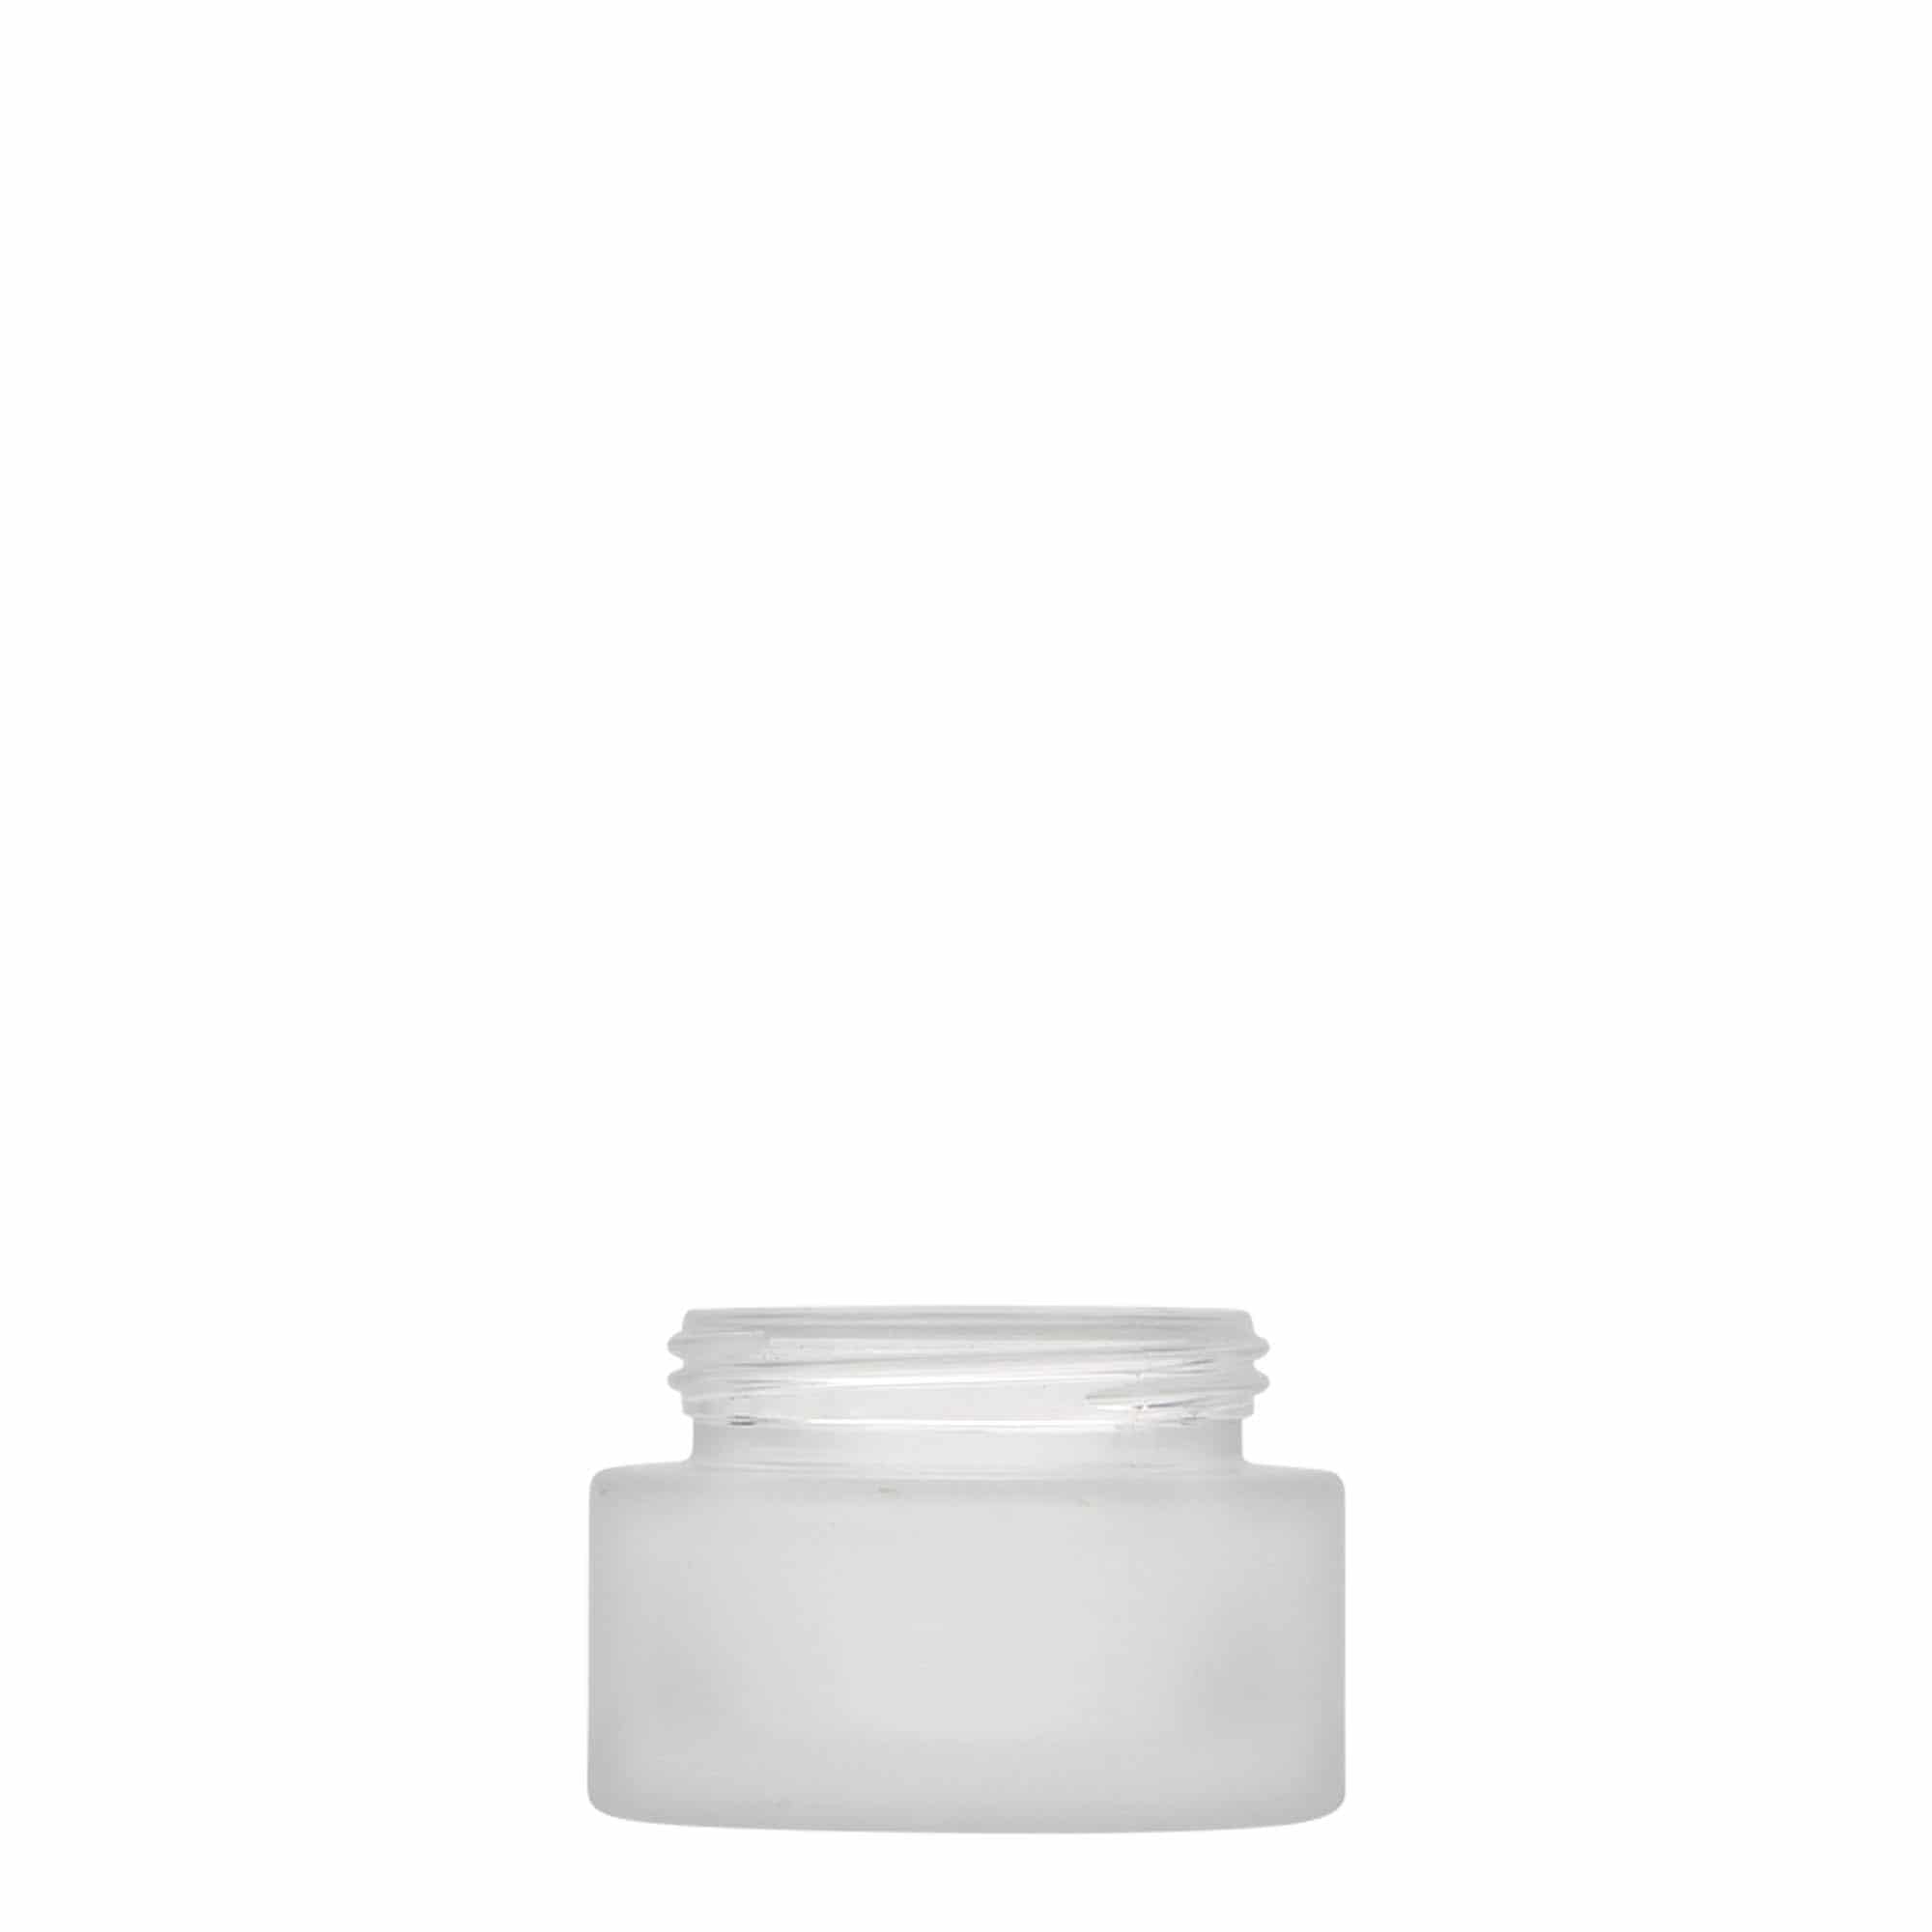 30 ml cosmetic jar 'Platin Edition', glass, frosted, closure: screw cap